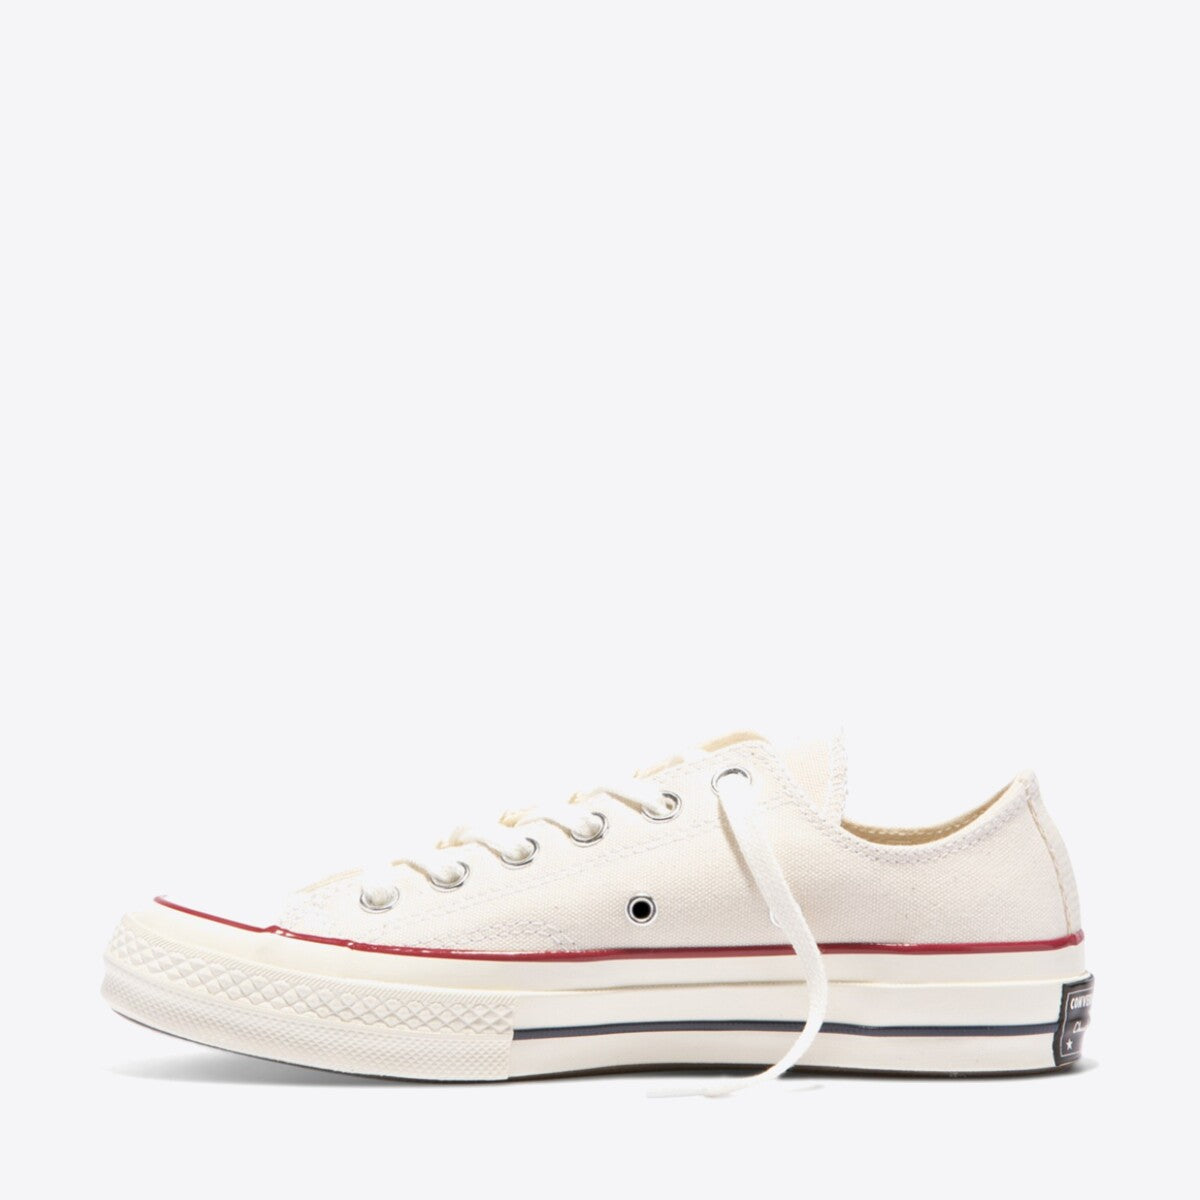 CONVERSE Chuck Taylor All Star 70 Canvas Low Parchment - Image 3